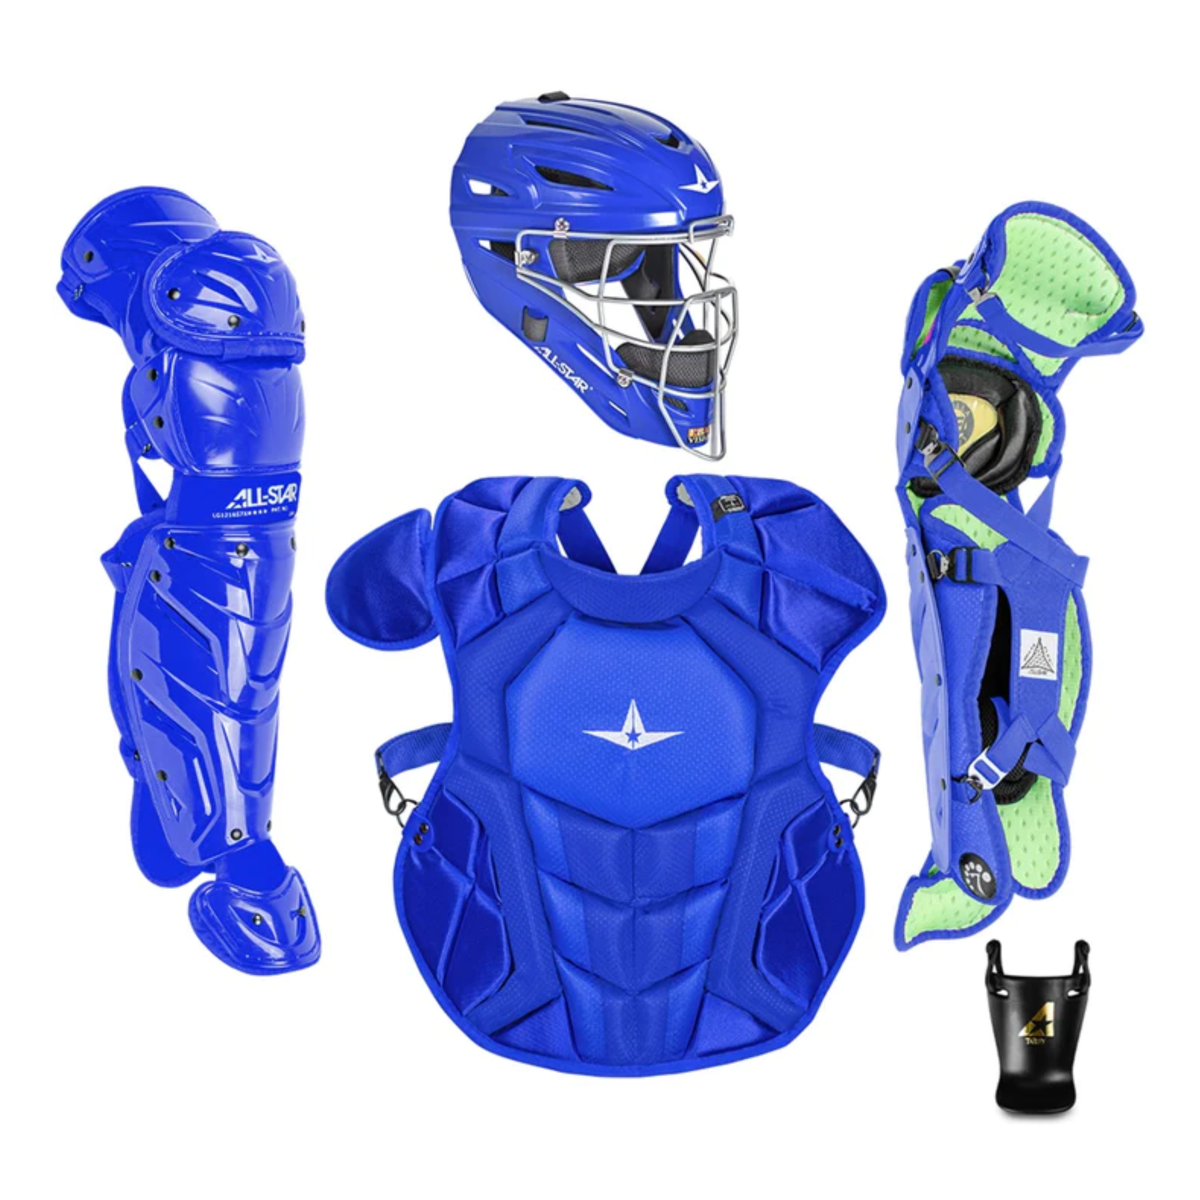 All-Star S7 Axis Pro Catcher's Complete Set - Solid Colors